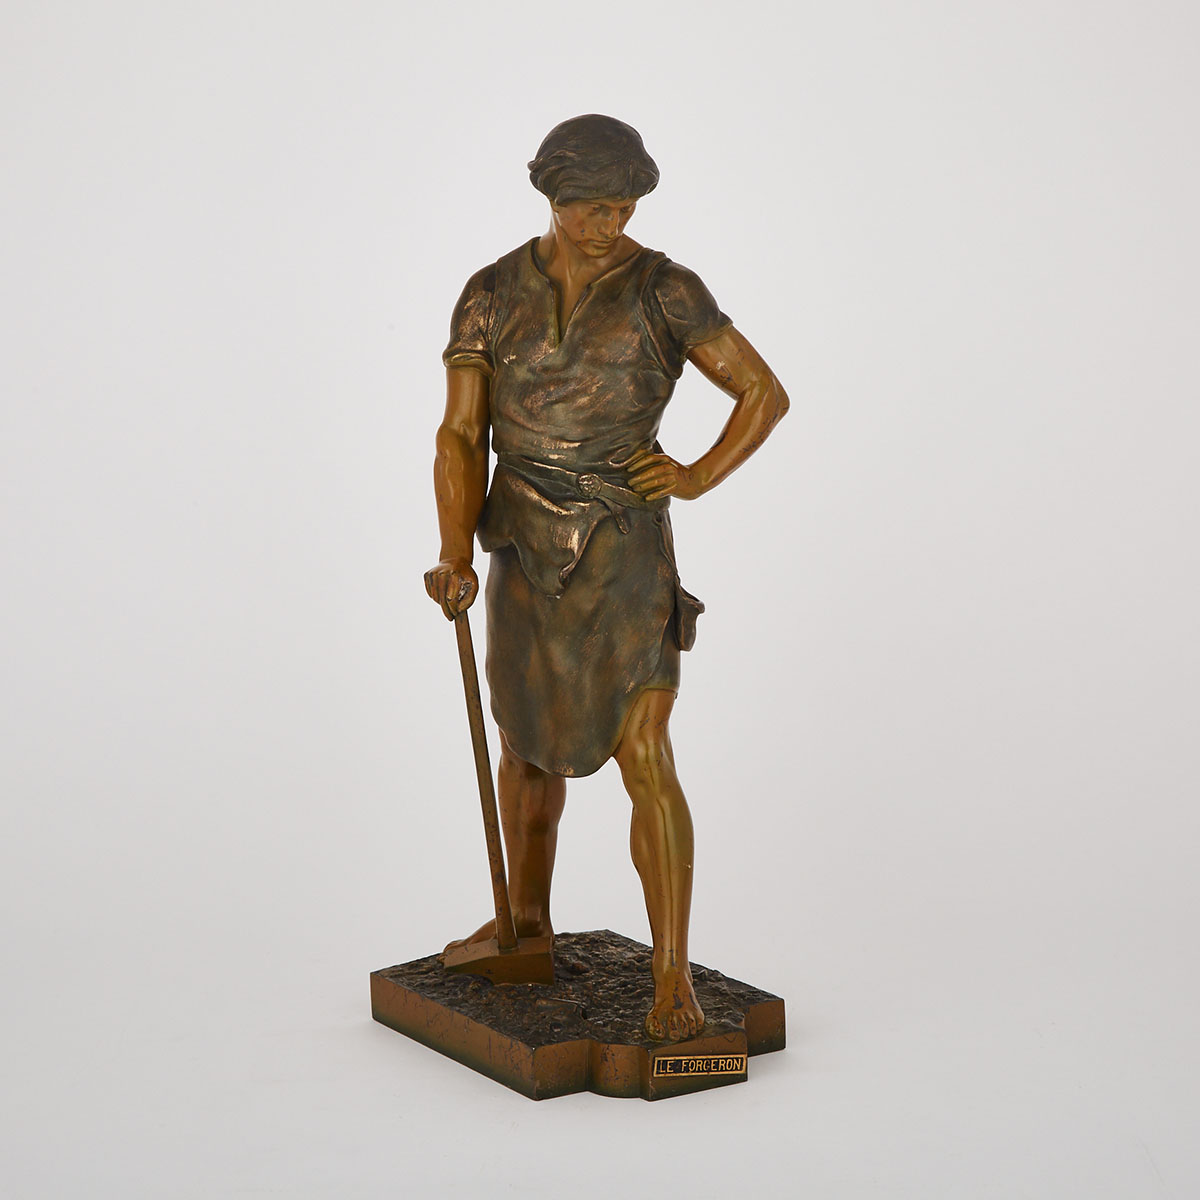 French School Patinated White Metal Figure of a Black Smith, ‘Le Forgeron’, late 19th century